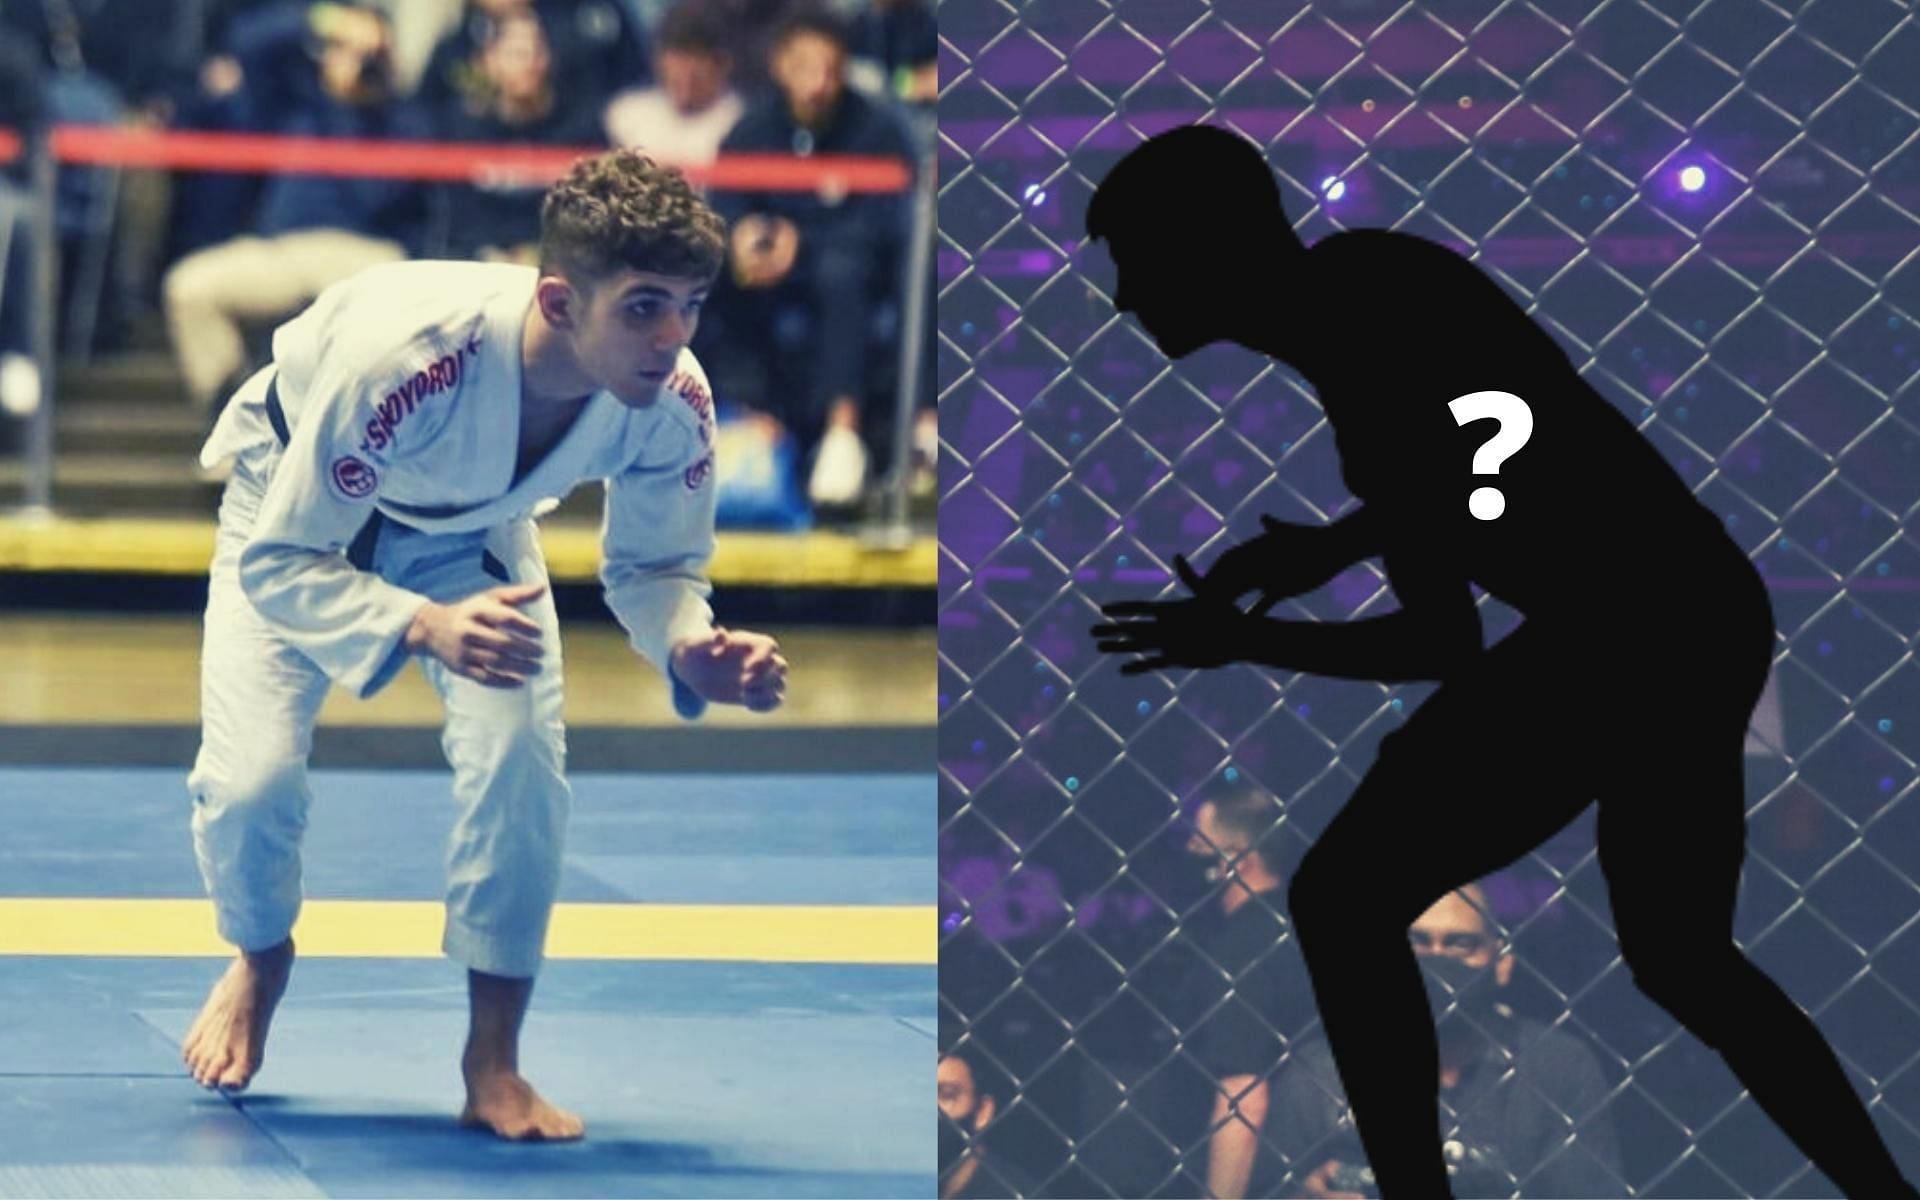 Who should ONE Championship&#039;s Mikey Musumeci face next? (Images courtesy: @mikeymusumeci on Instagram, ONE Championship)